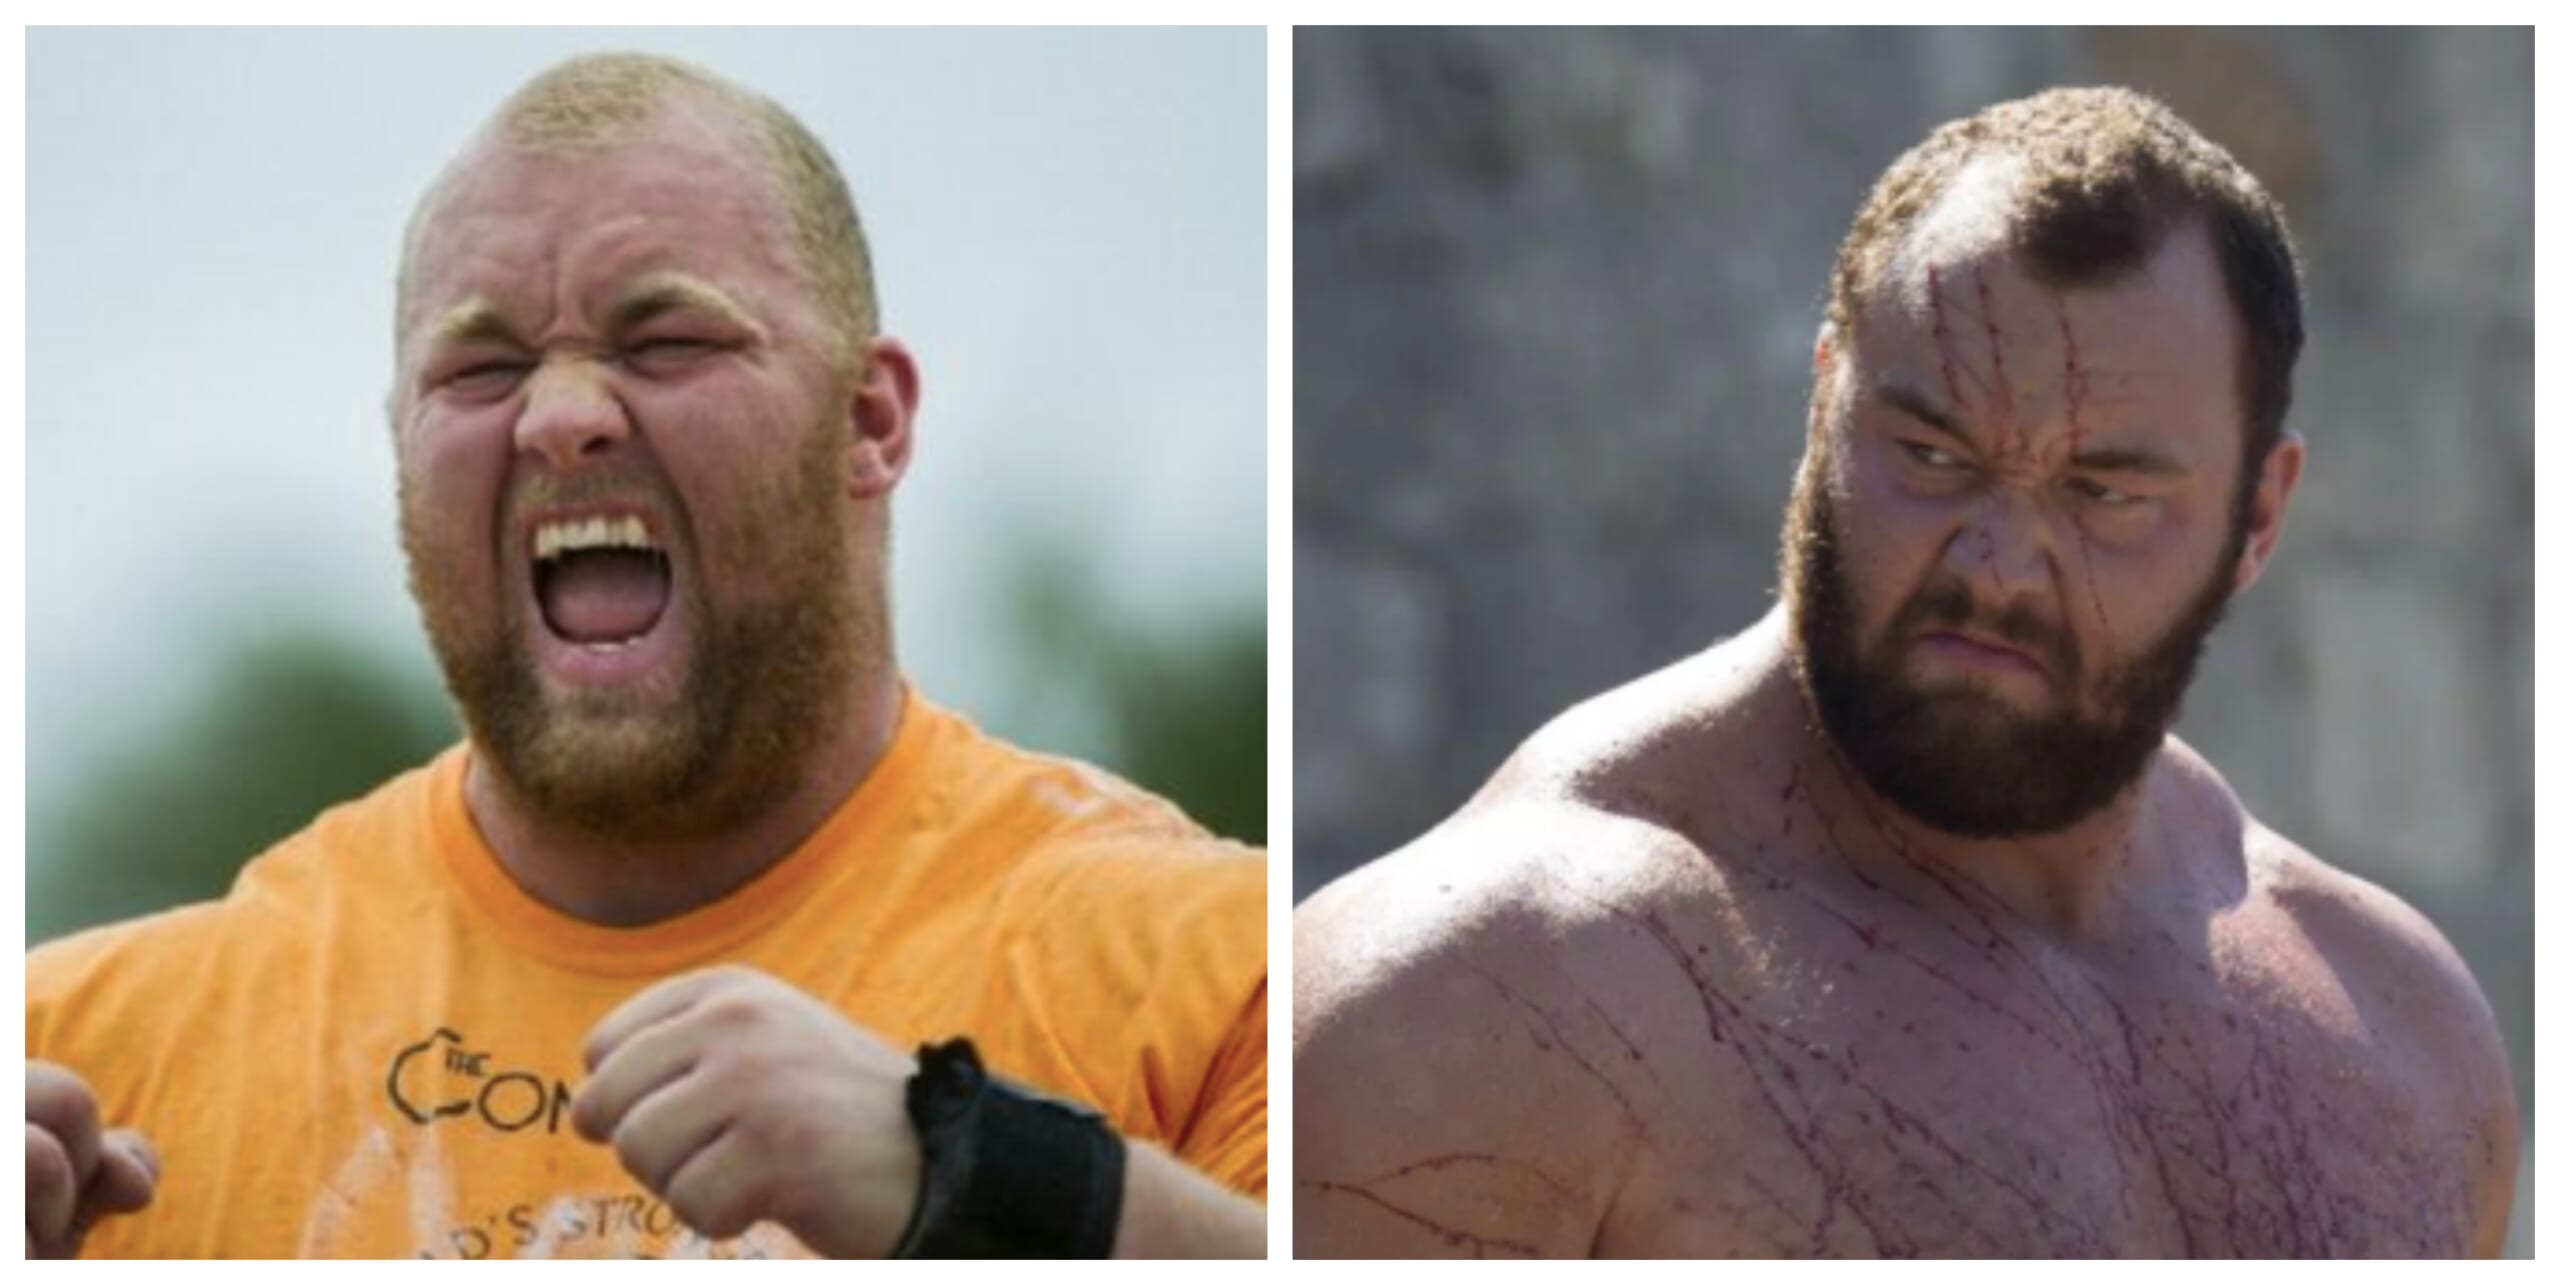 Game of Thrones' Star Hafthor Björnsson Crowned World's Strongest Man